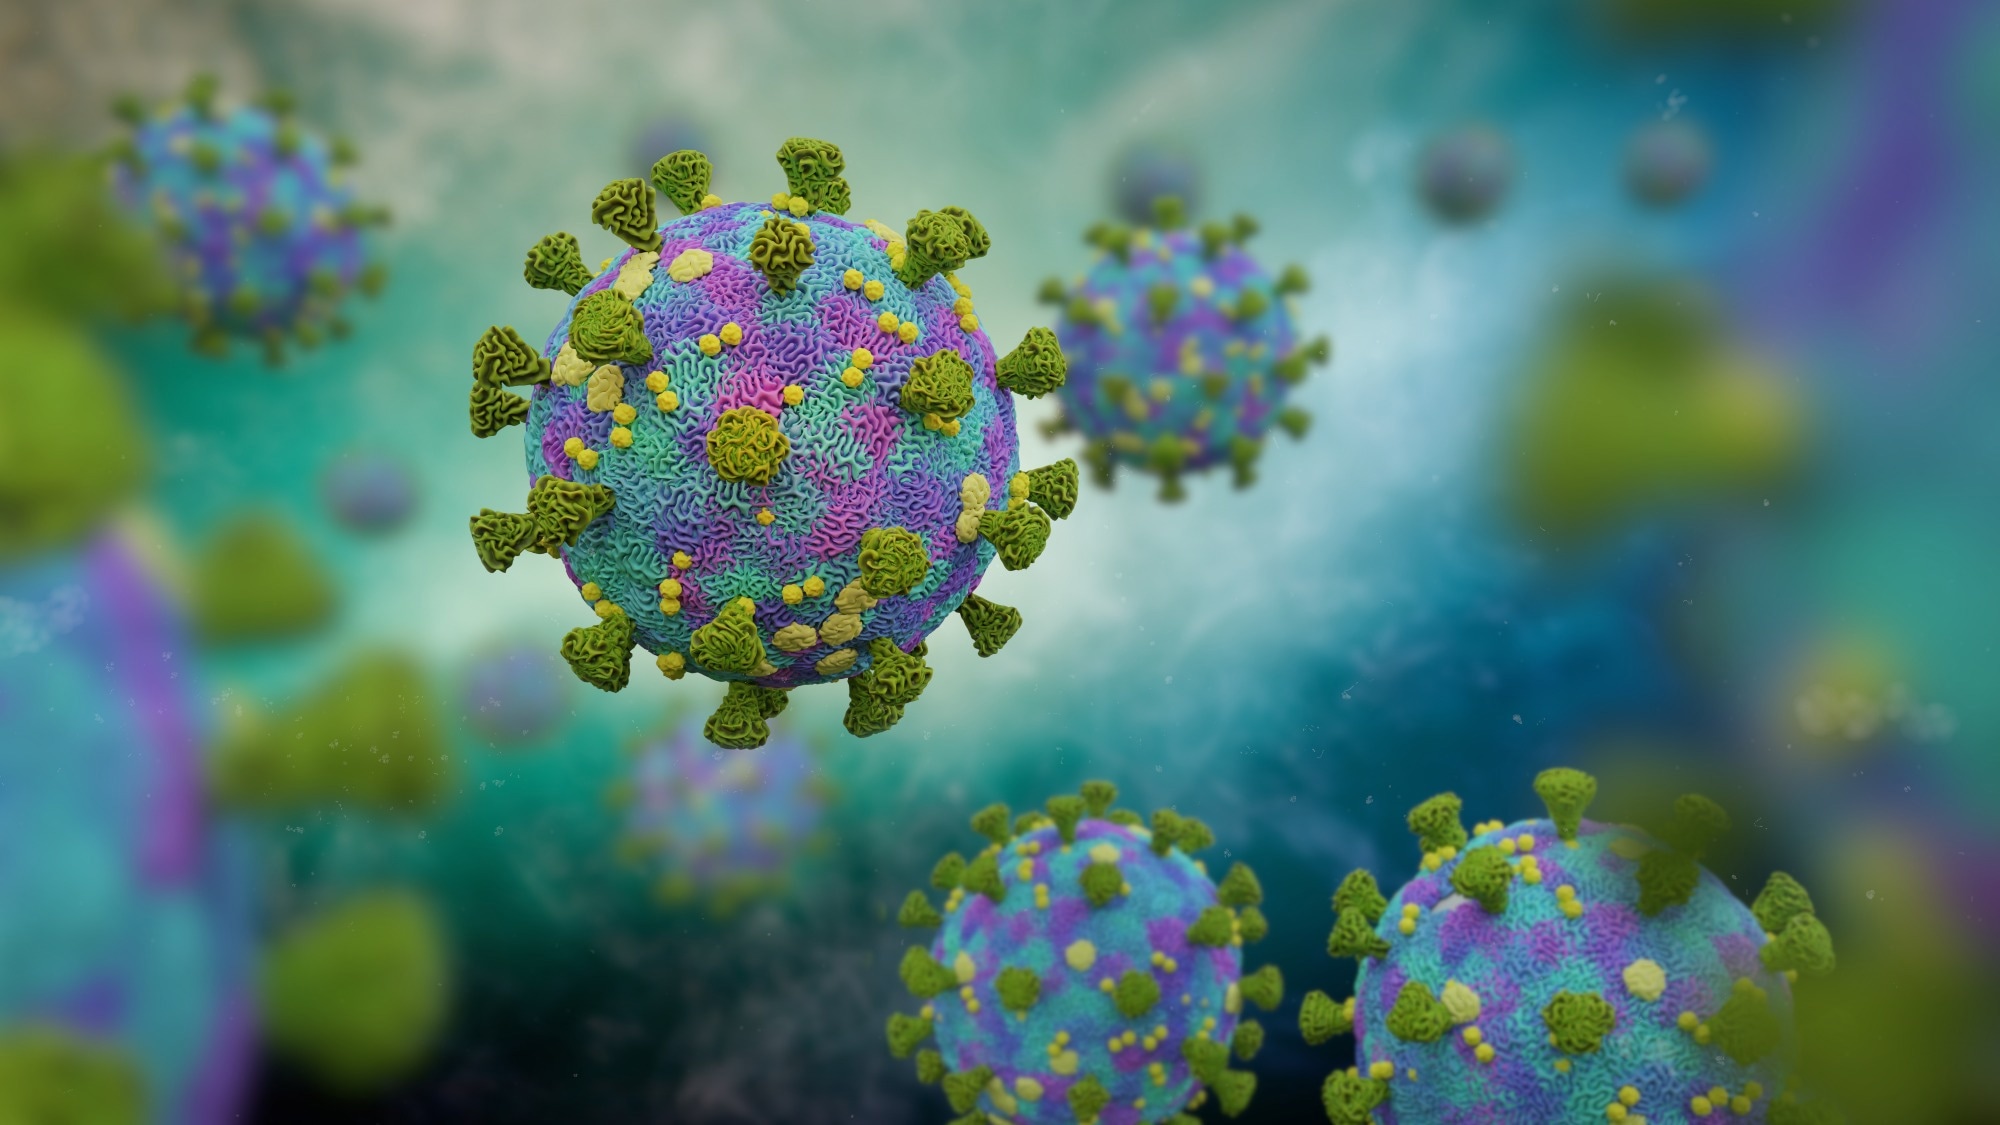 Study: Past SARS-CoV-2 infection protection against re-infection: a systematic review and meta-analysis. Image Credit: Dotted Yeti / Shutterstock